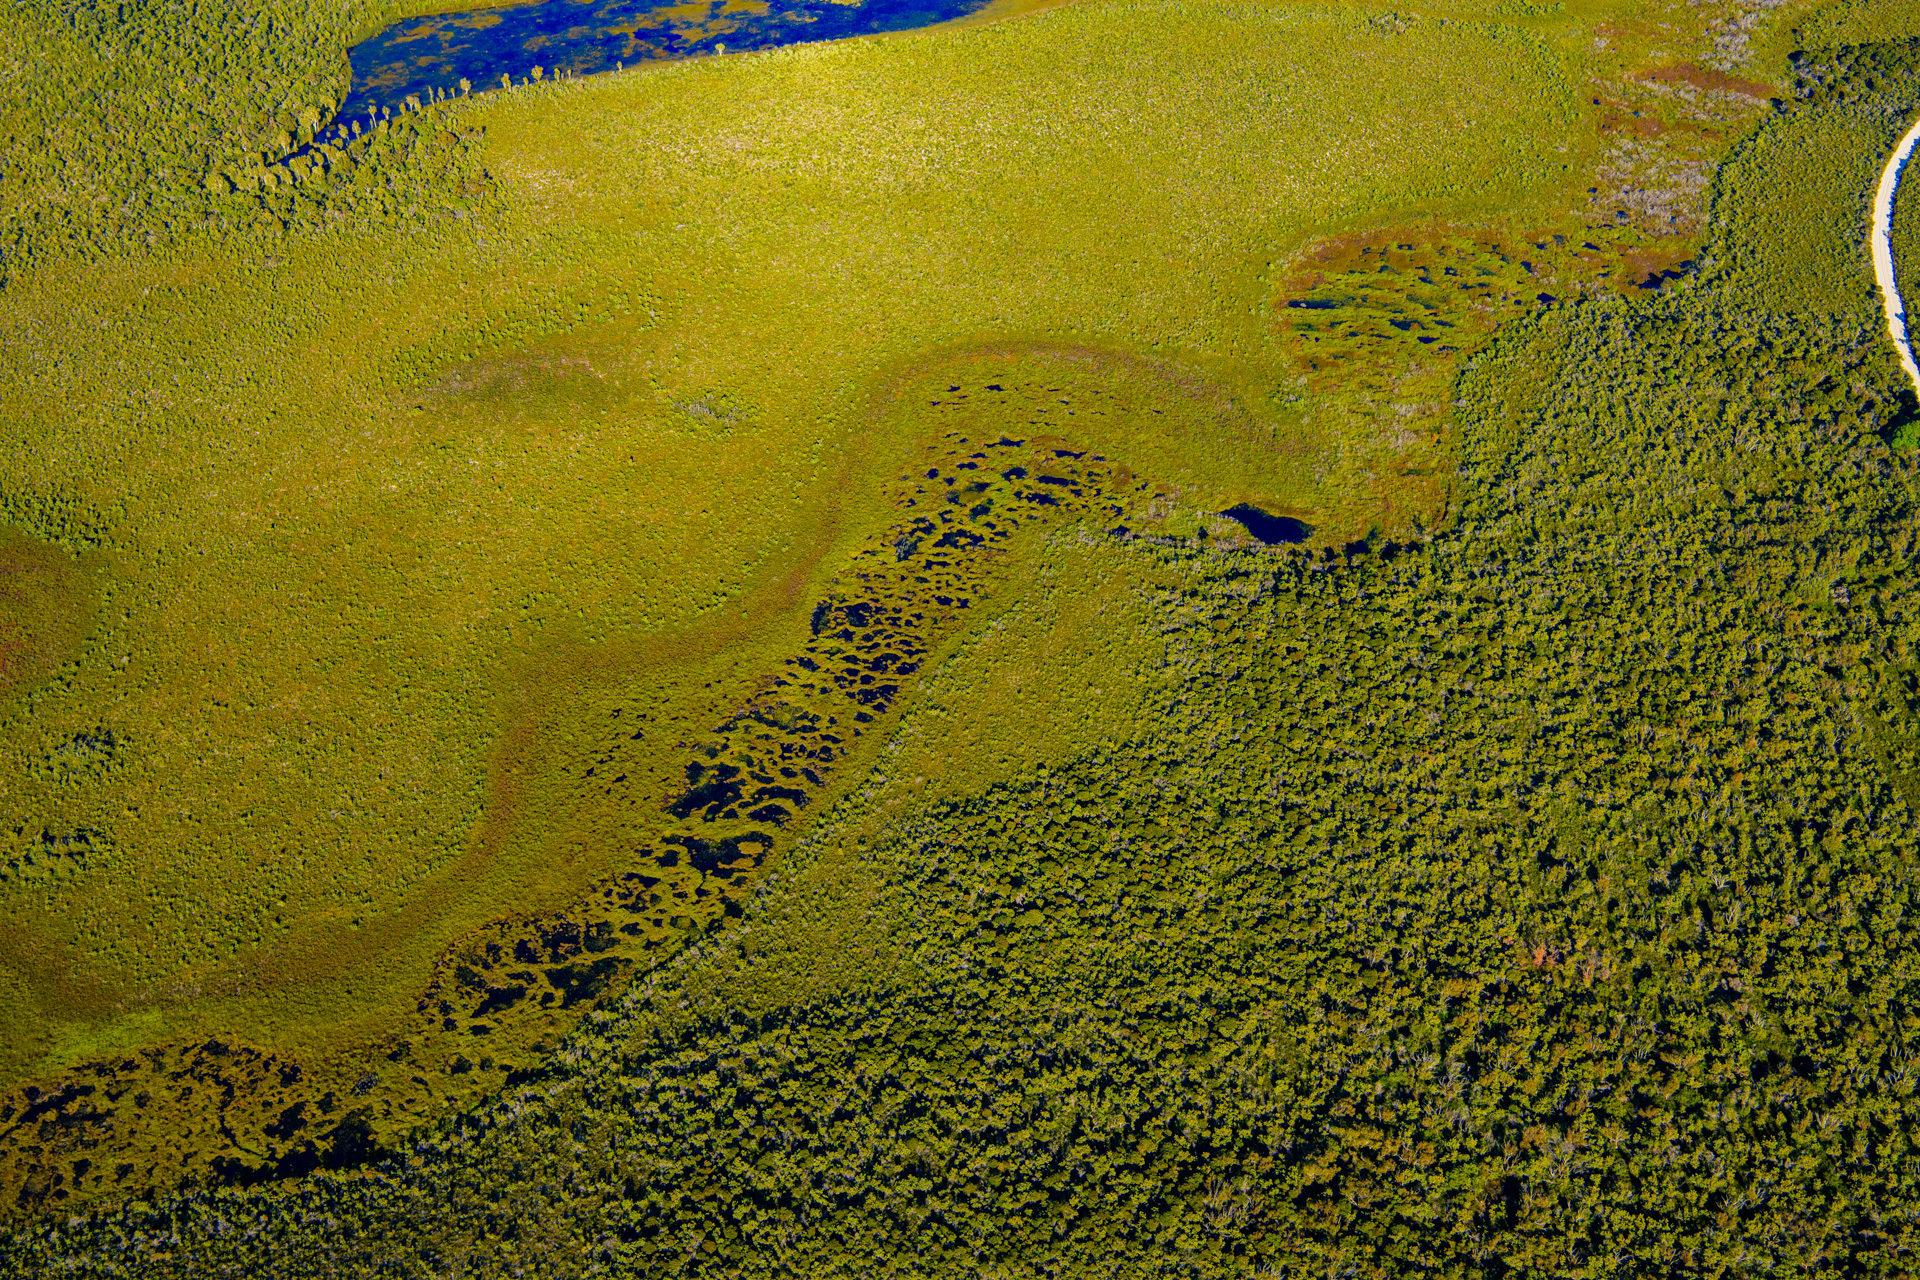 Aerial view of patterned fens on Mulgumpin. Photo by Gary Cranitch © Queensland Museum